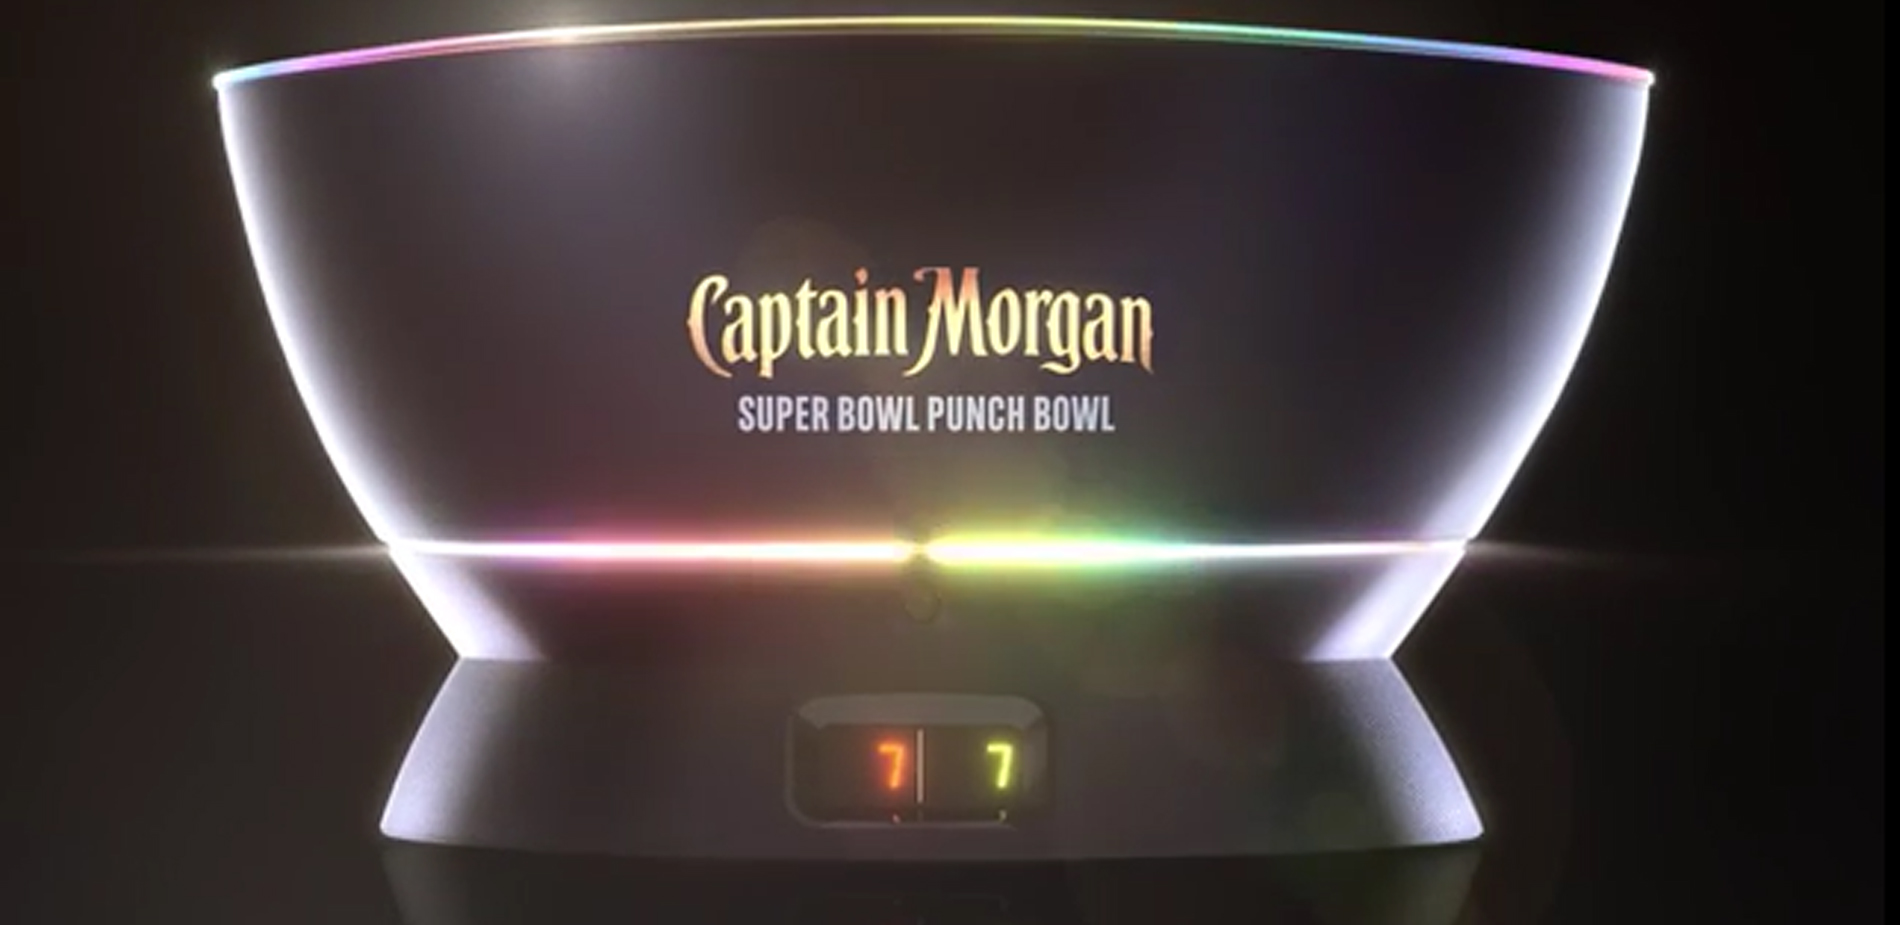 Captain Morgan, the First-Ever Official Spiced Rum Sponsor of the NFL, Brings the Spice to Super Bowl LVI with the Most Unnecessary, Necessary Invention in the History of Sports…Maybe the World